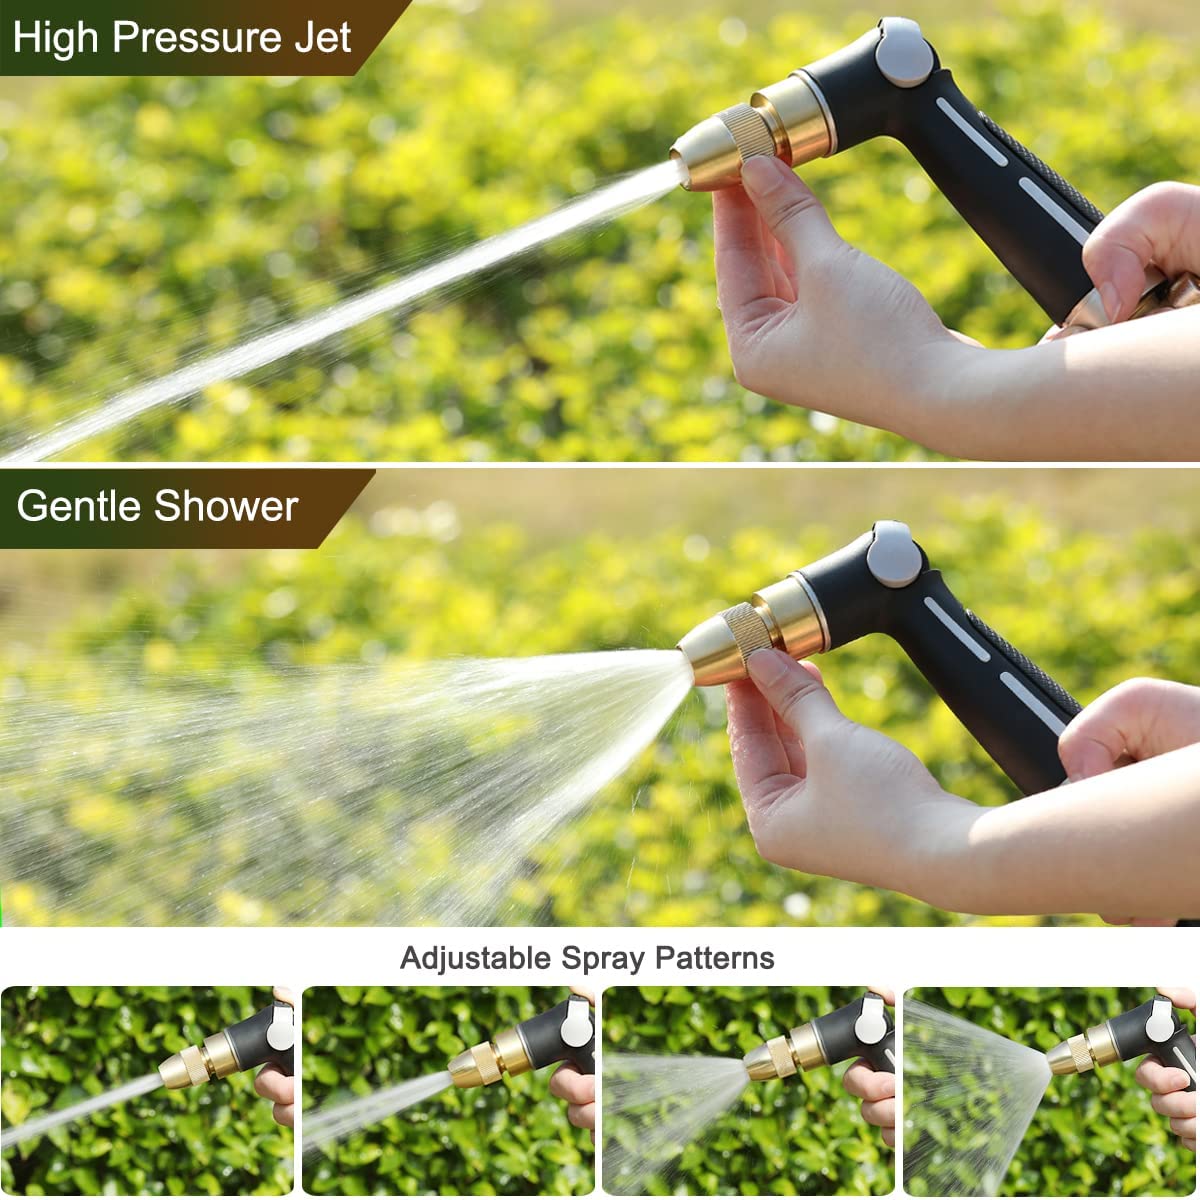 Pup Jet Dog Wash High Pressure Hose Foam Sprayer Water Gun Garden Hose  Nozzle 8 Spray Mode with Soap Dispenser Bottle for Watering Plants Cleaning